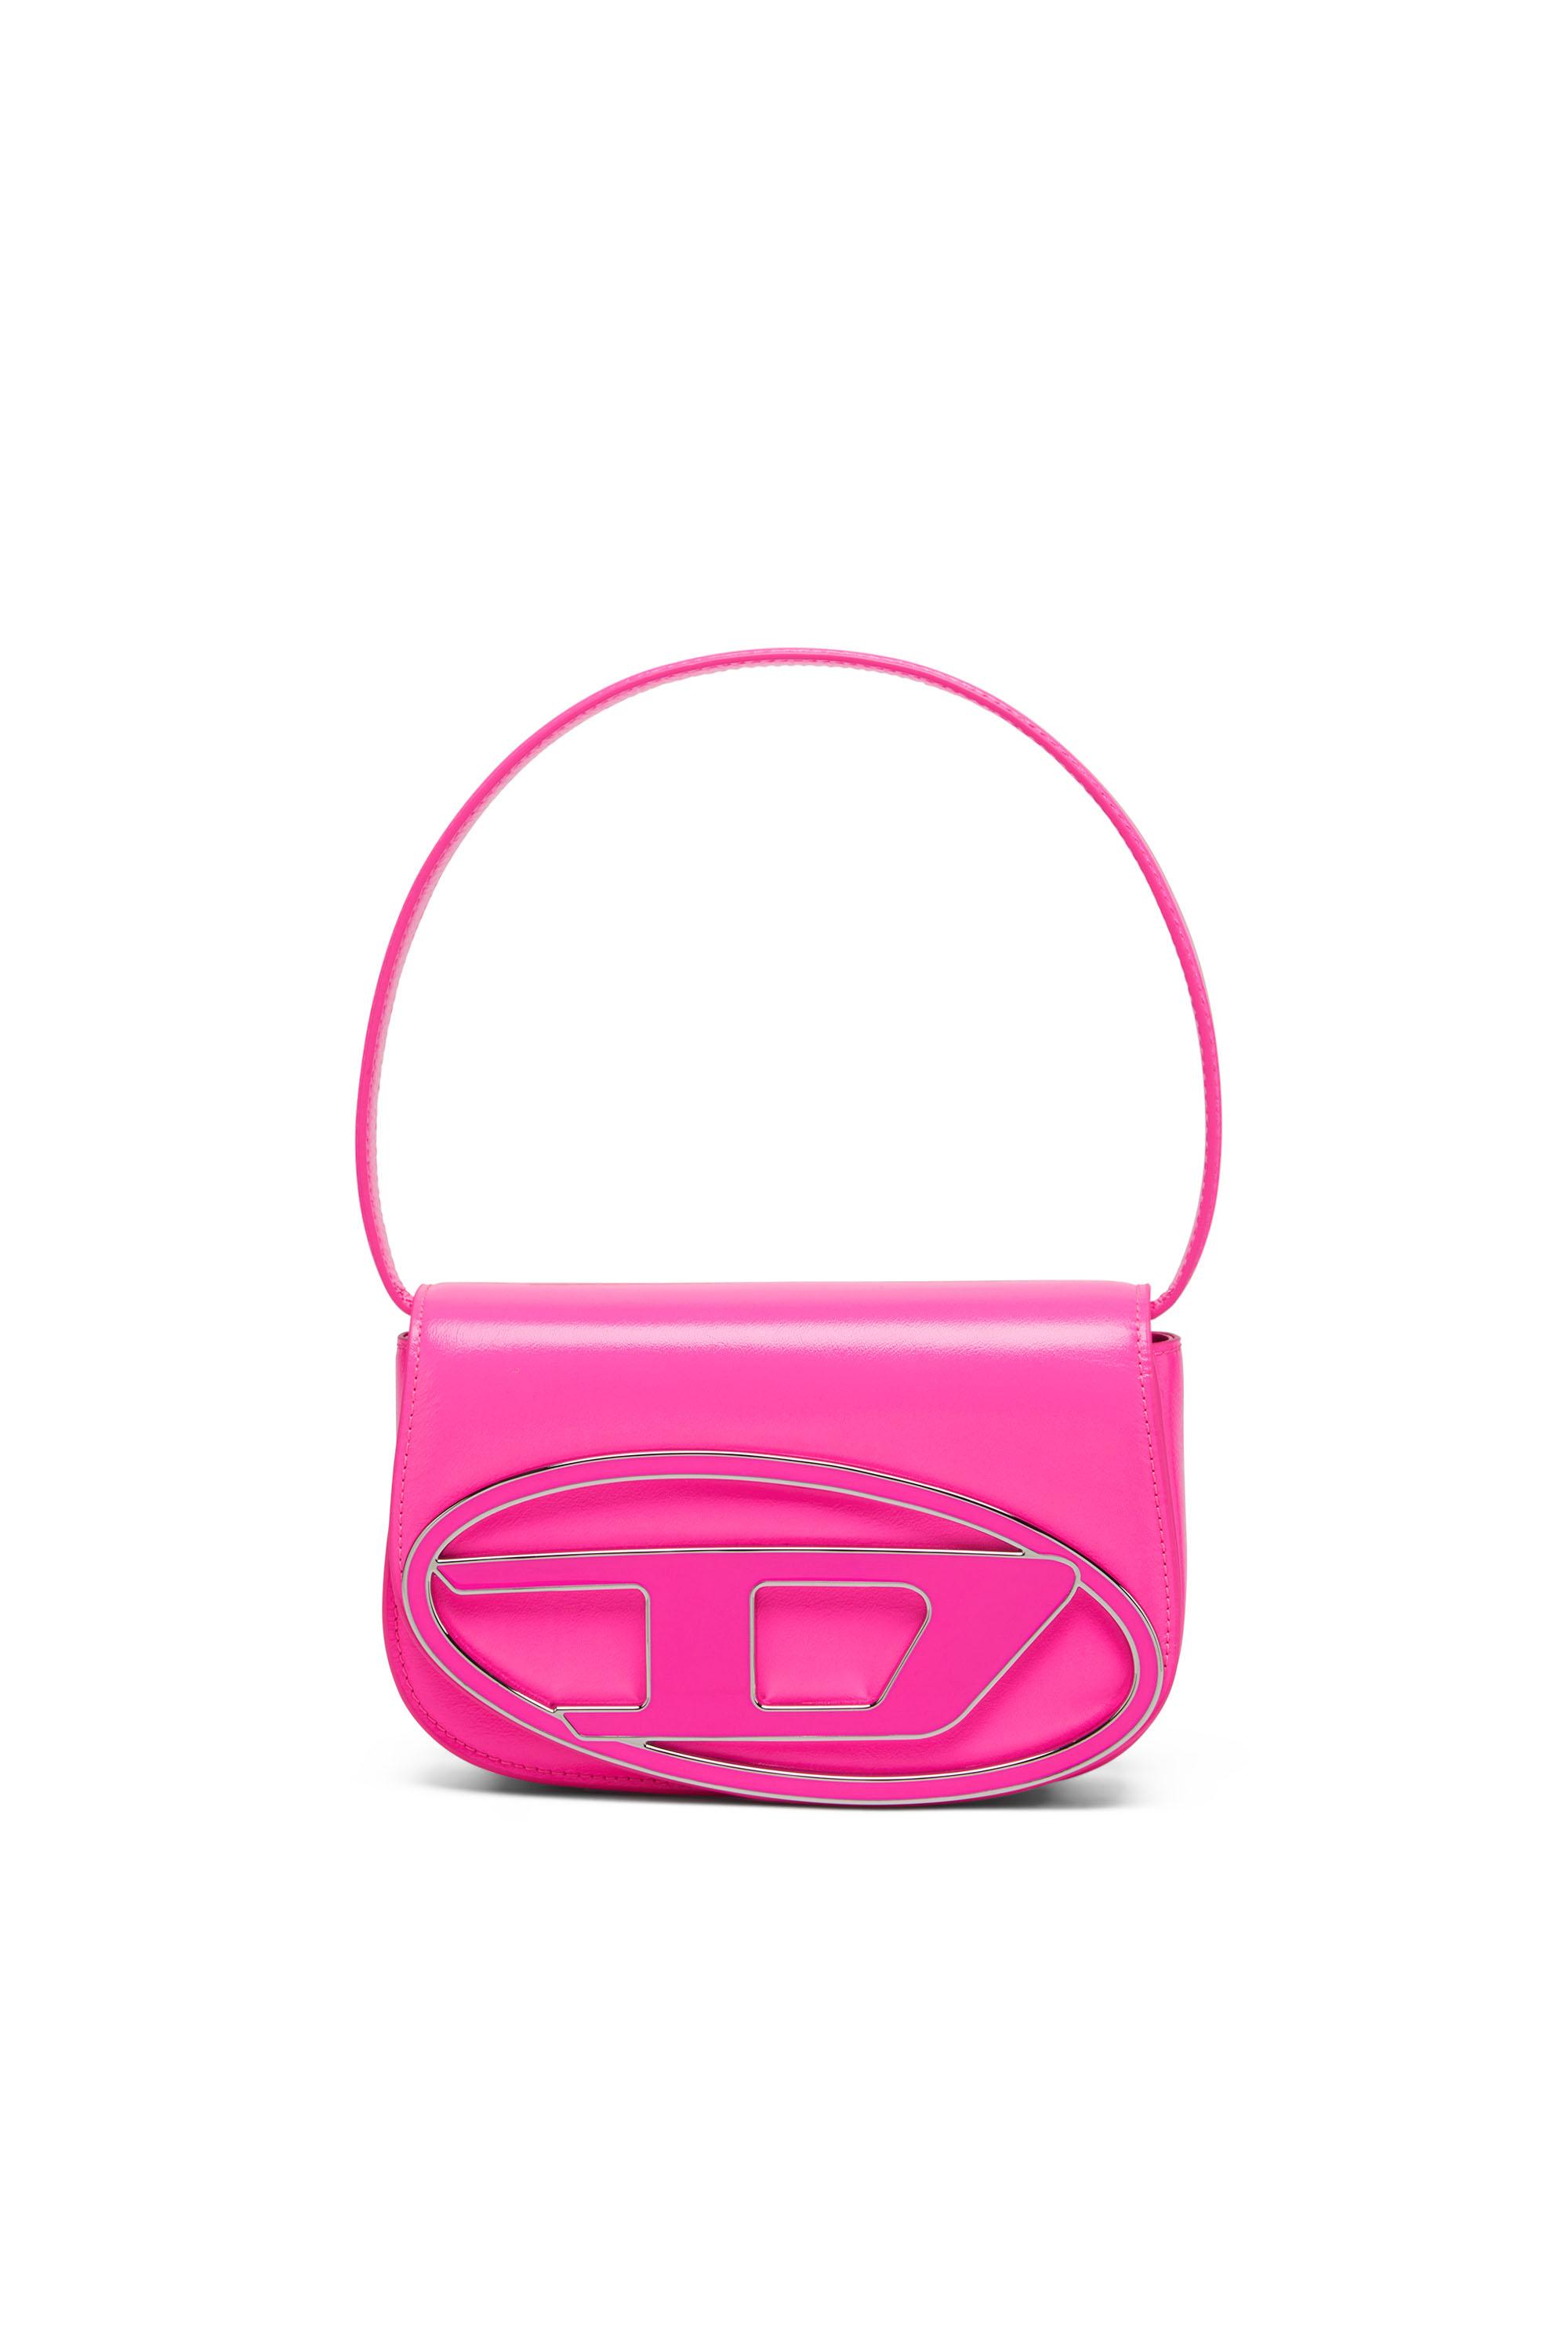 DIESEL 1dr - Iconic Shoulder Bag In Neon Leather - Shoulder Bags - Woman -  Pink | Lyst